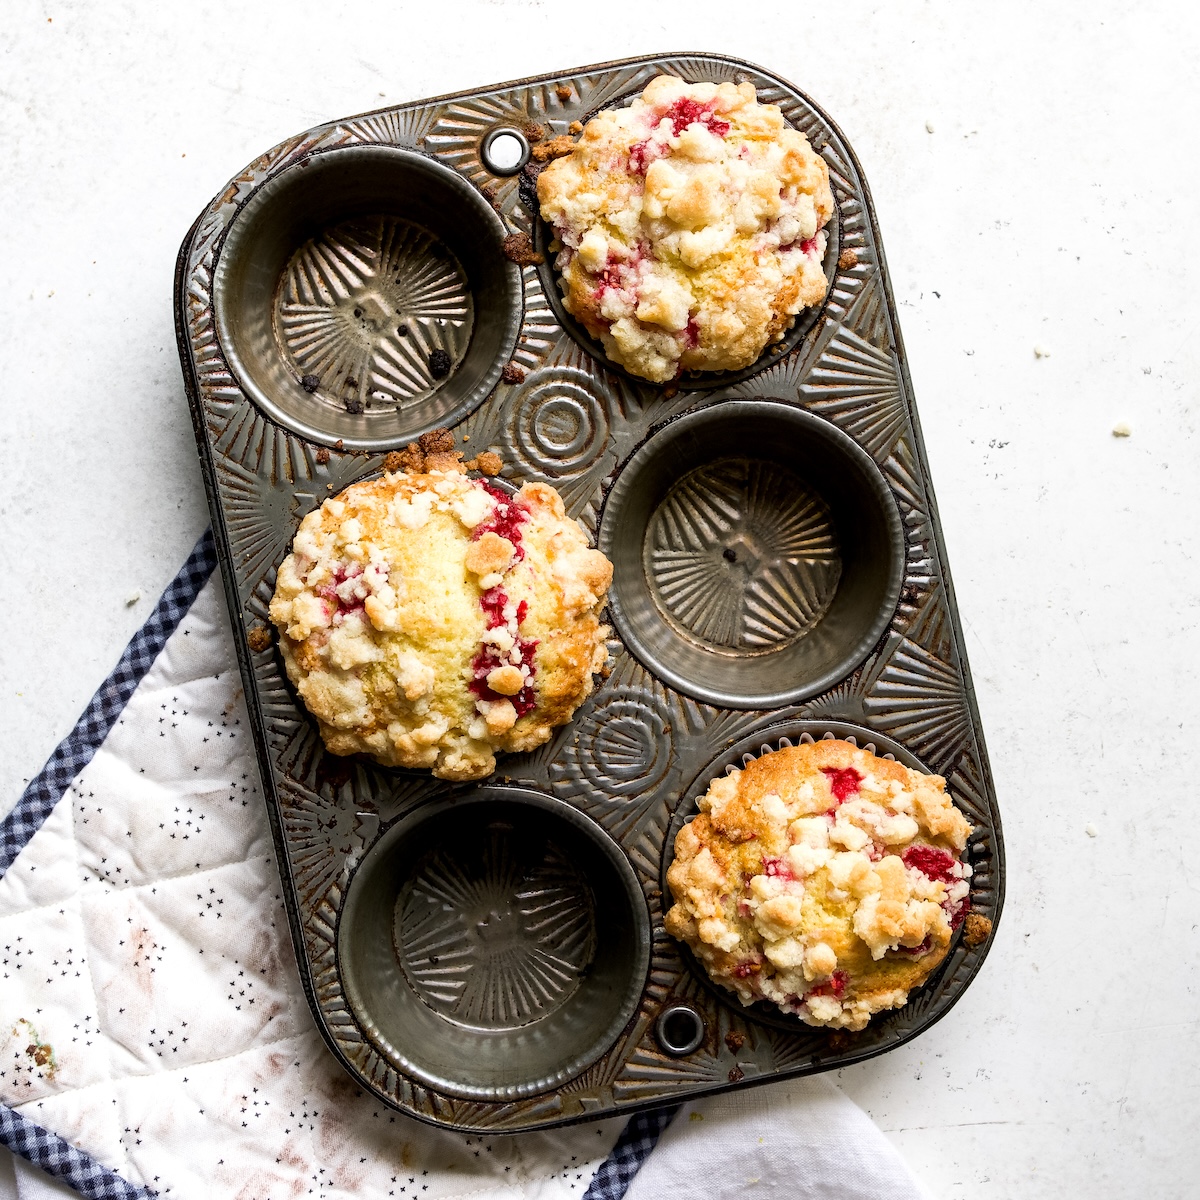 Three baked raspberry streusel muffins on a white surface.